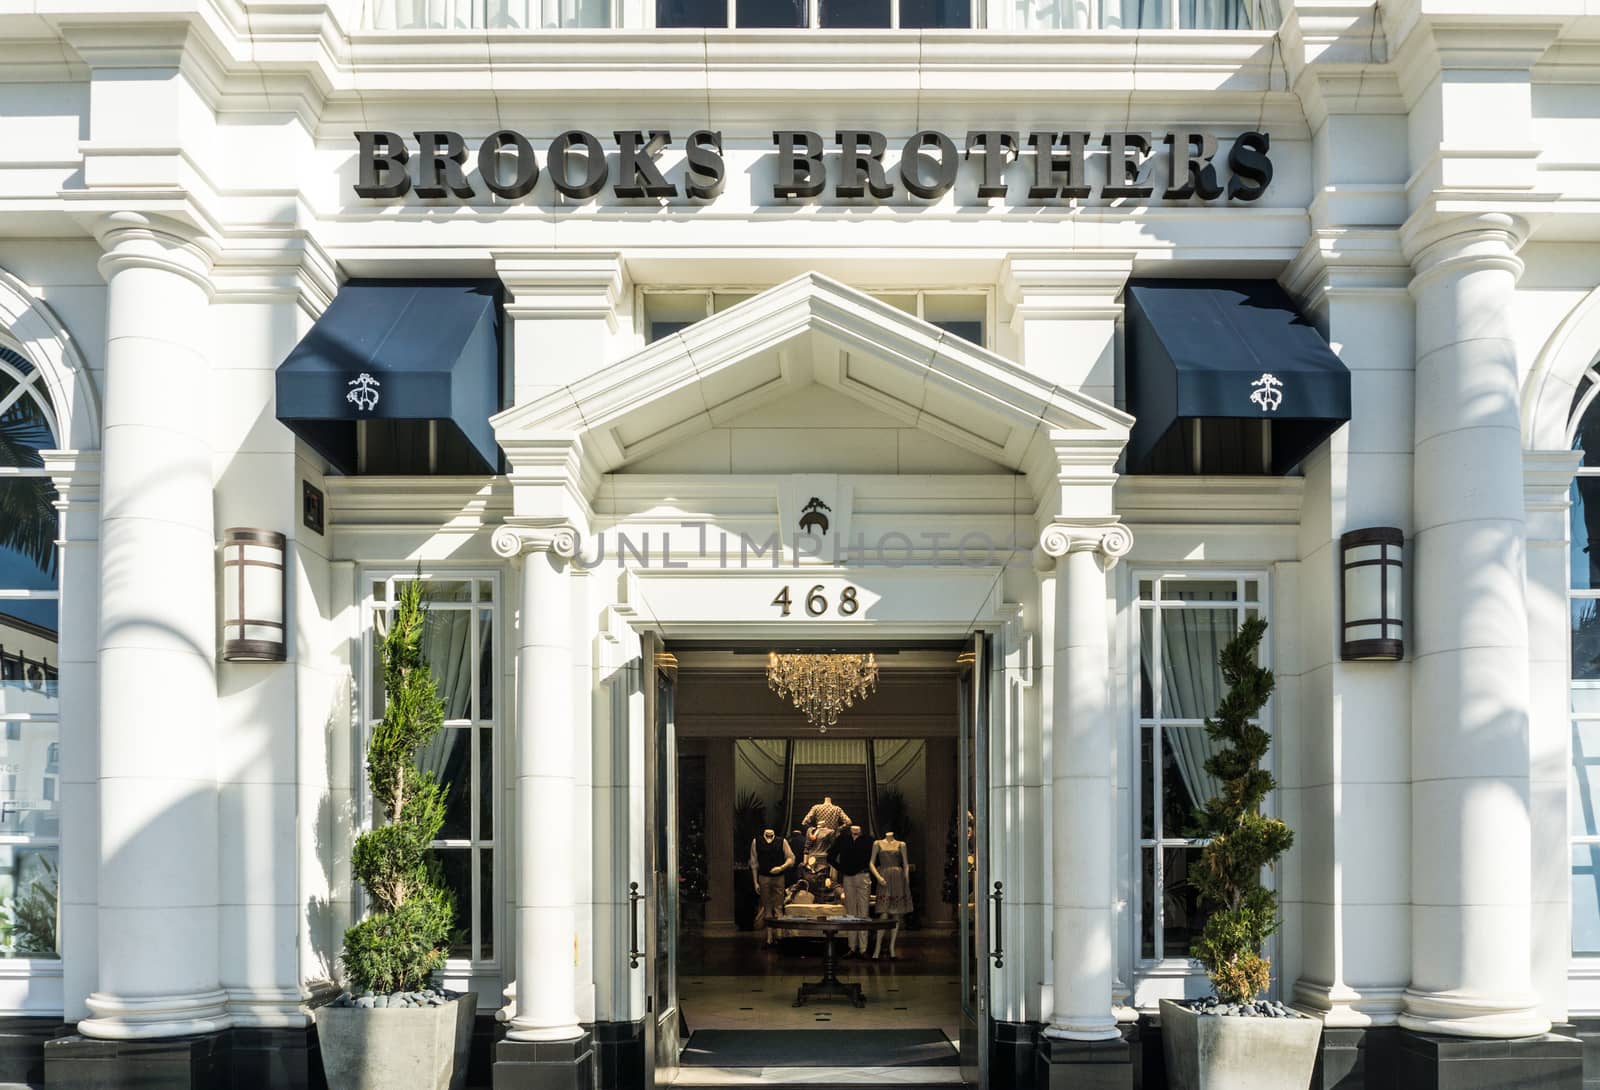 BEVERLY HILLS, CA/USA - JANUARY 3, 2015: Brook's Brothers retail store exterior. Brook's Brothers is the oldest men's clothier chain in the United States.